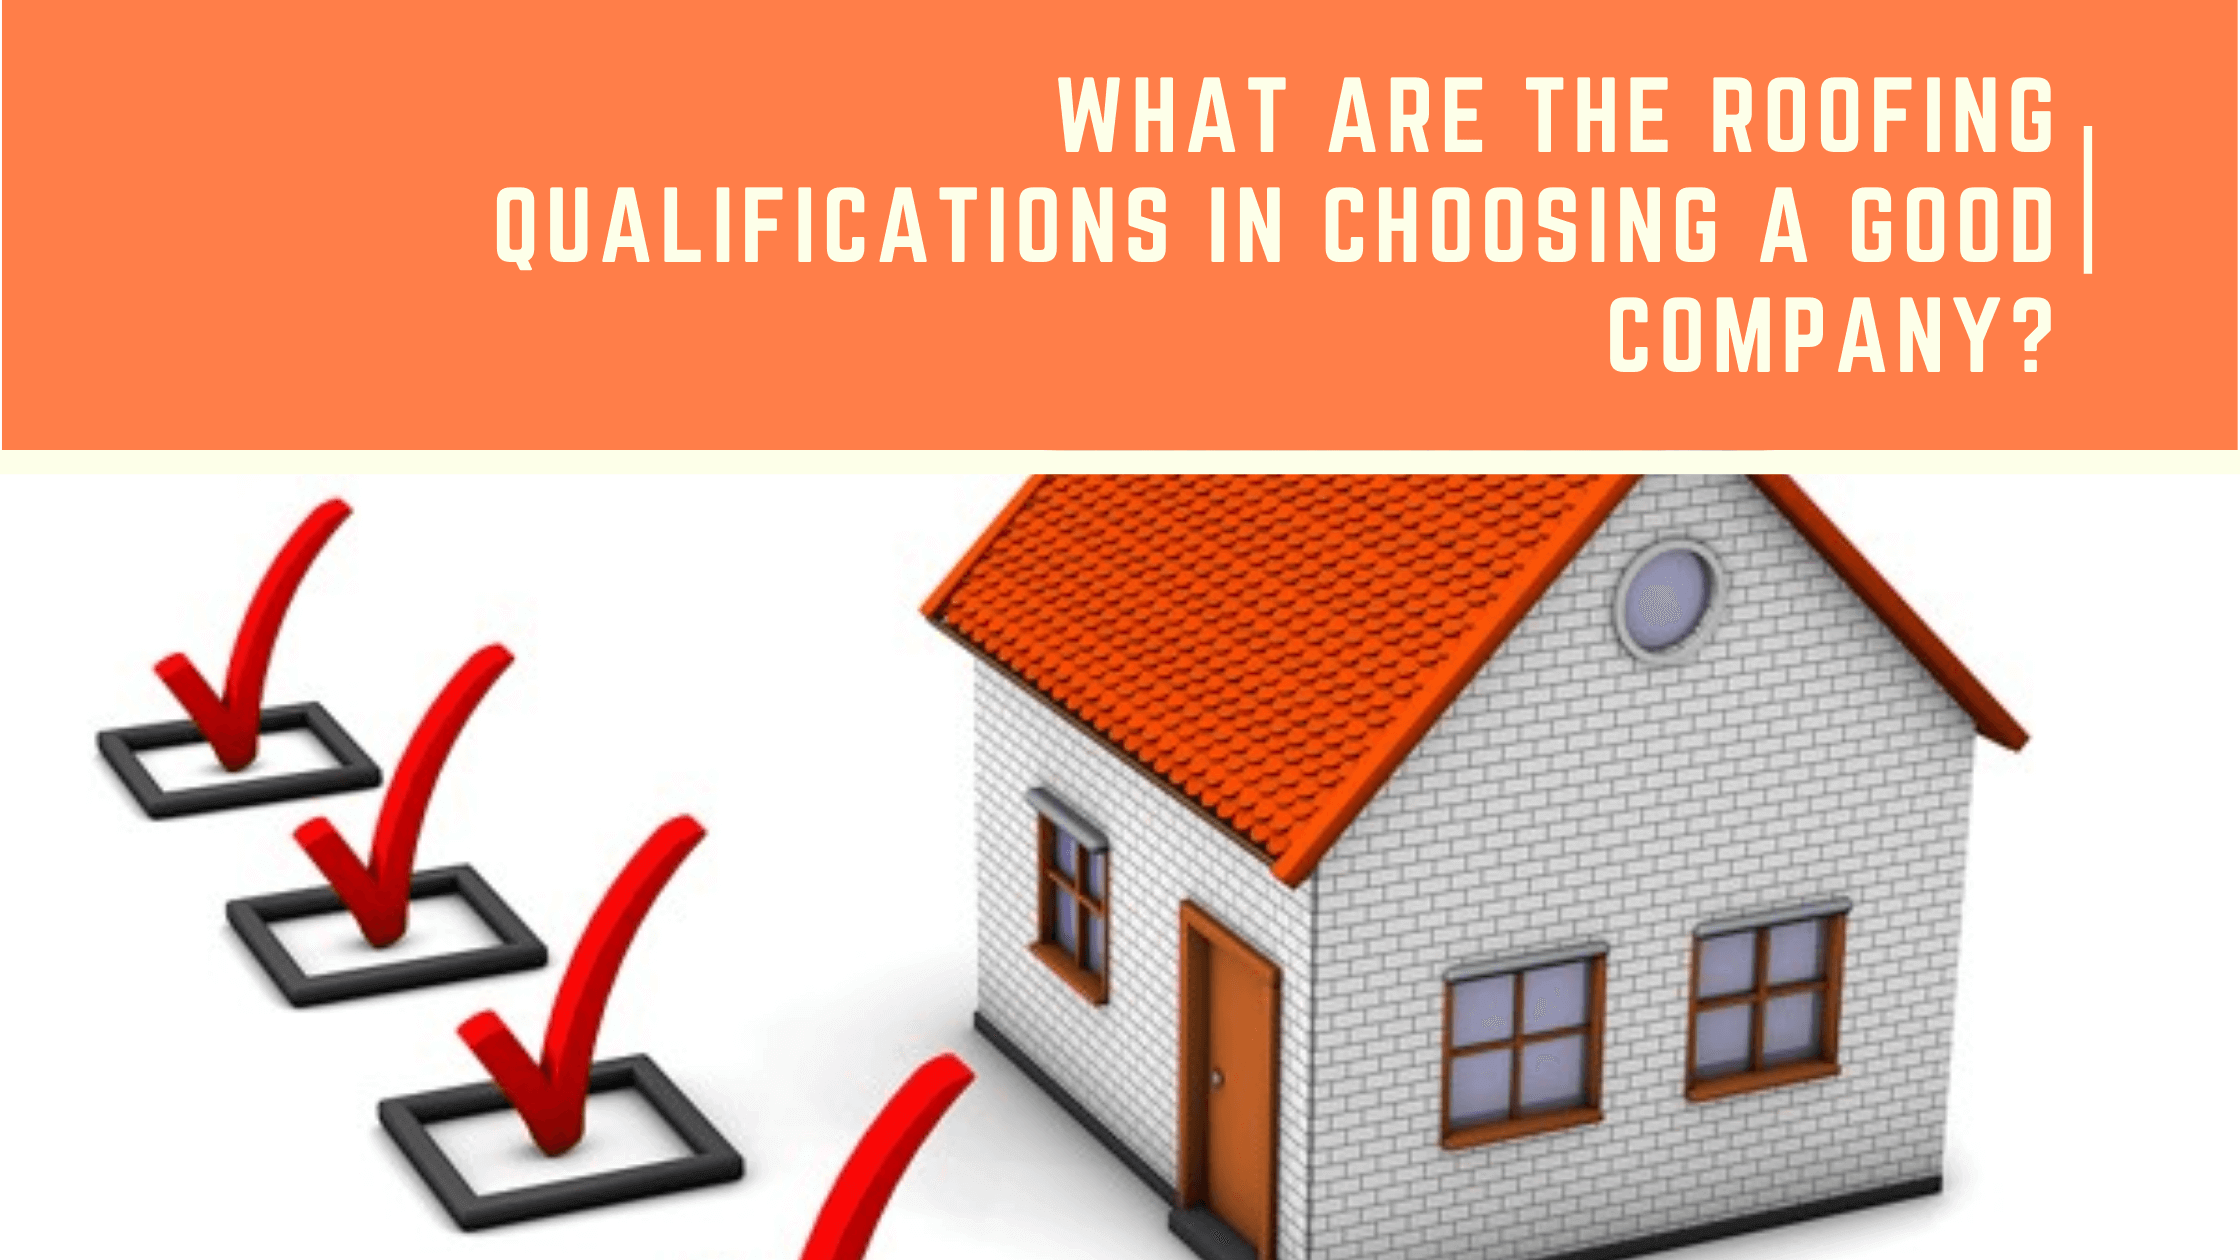 What_are_the roofing qualifications_in choosing a good company